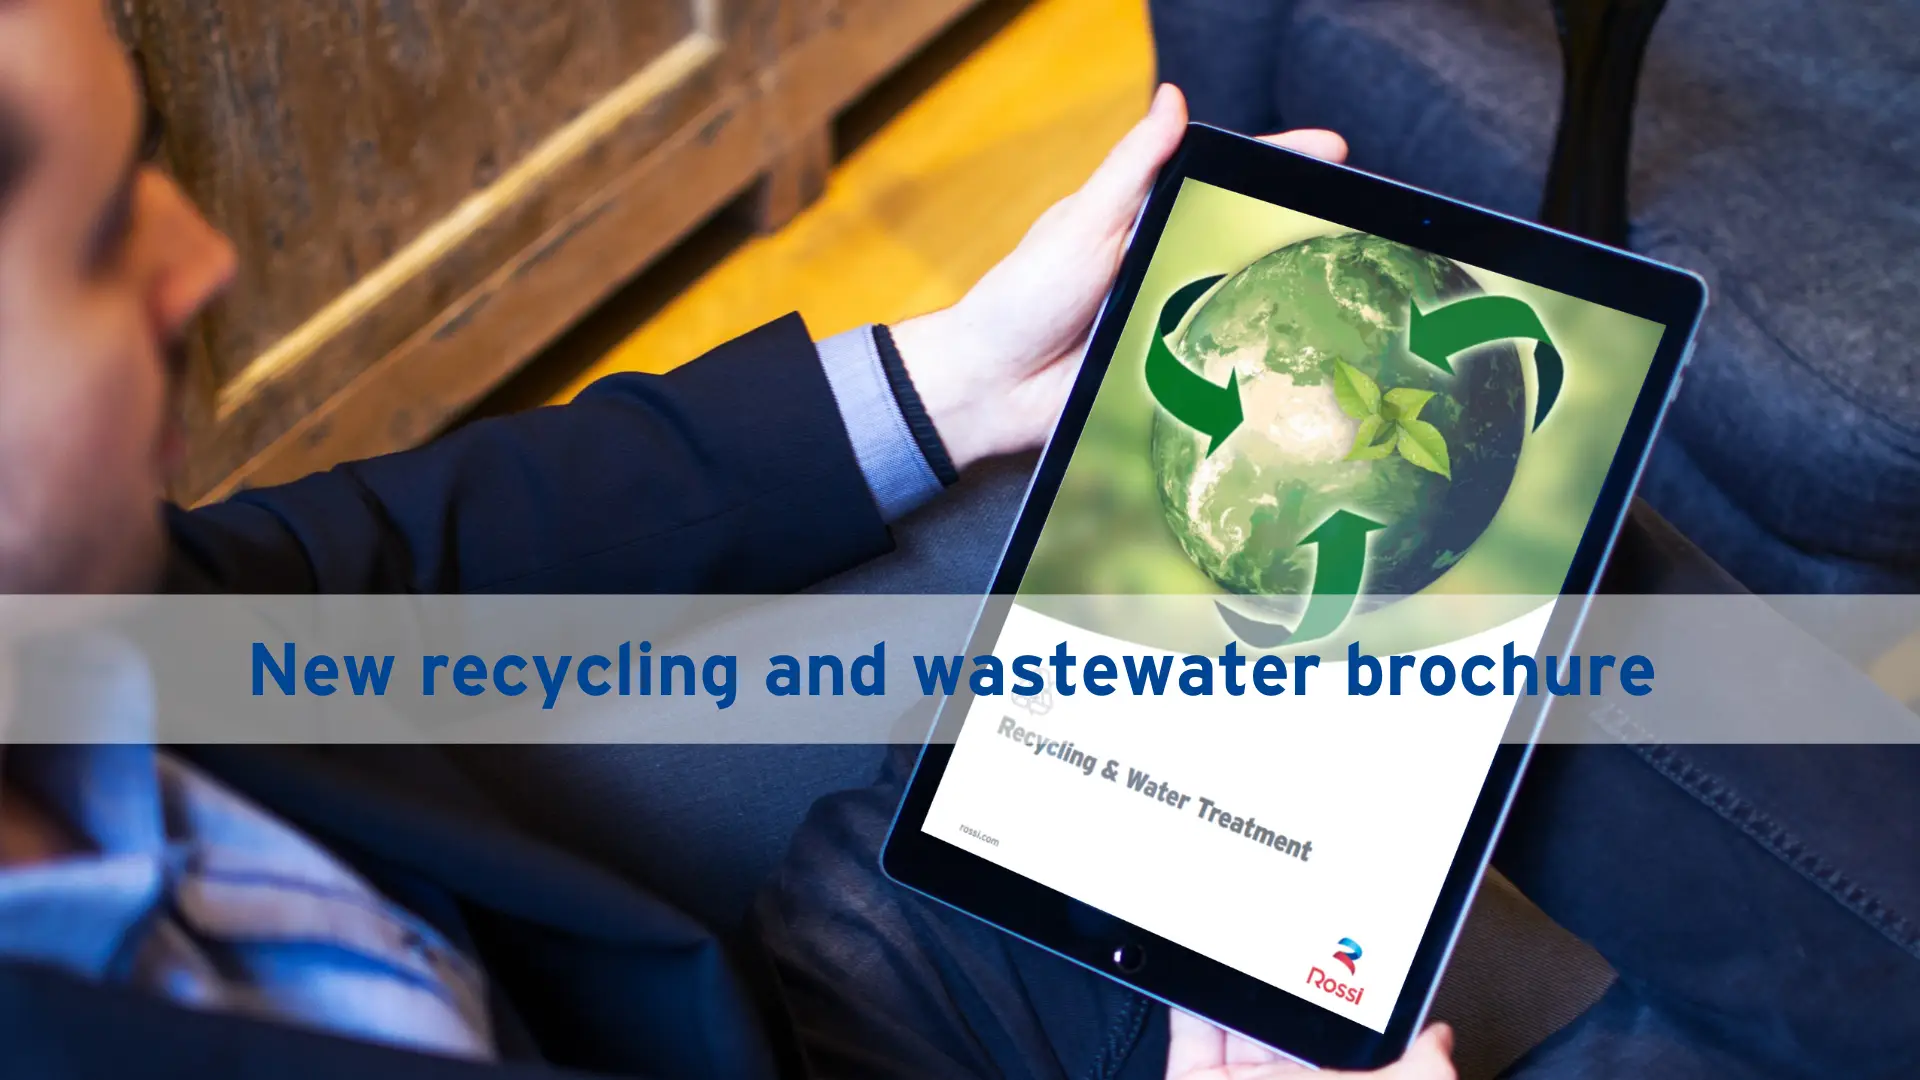 Digital recycling and wastewater brochure